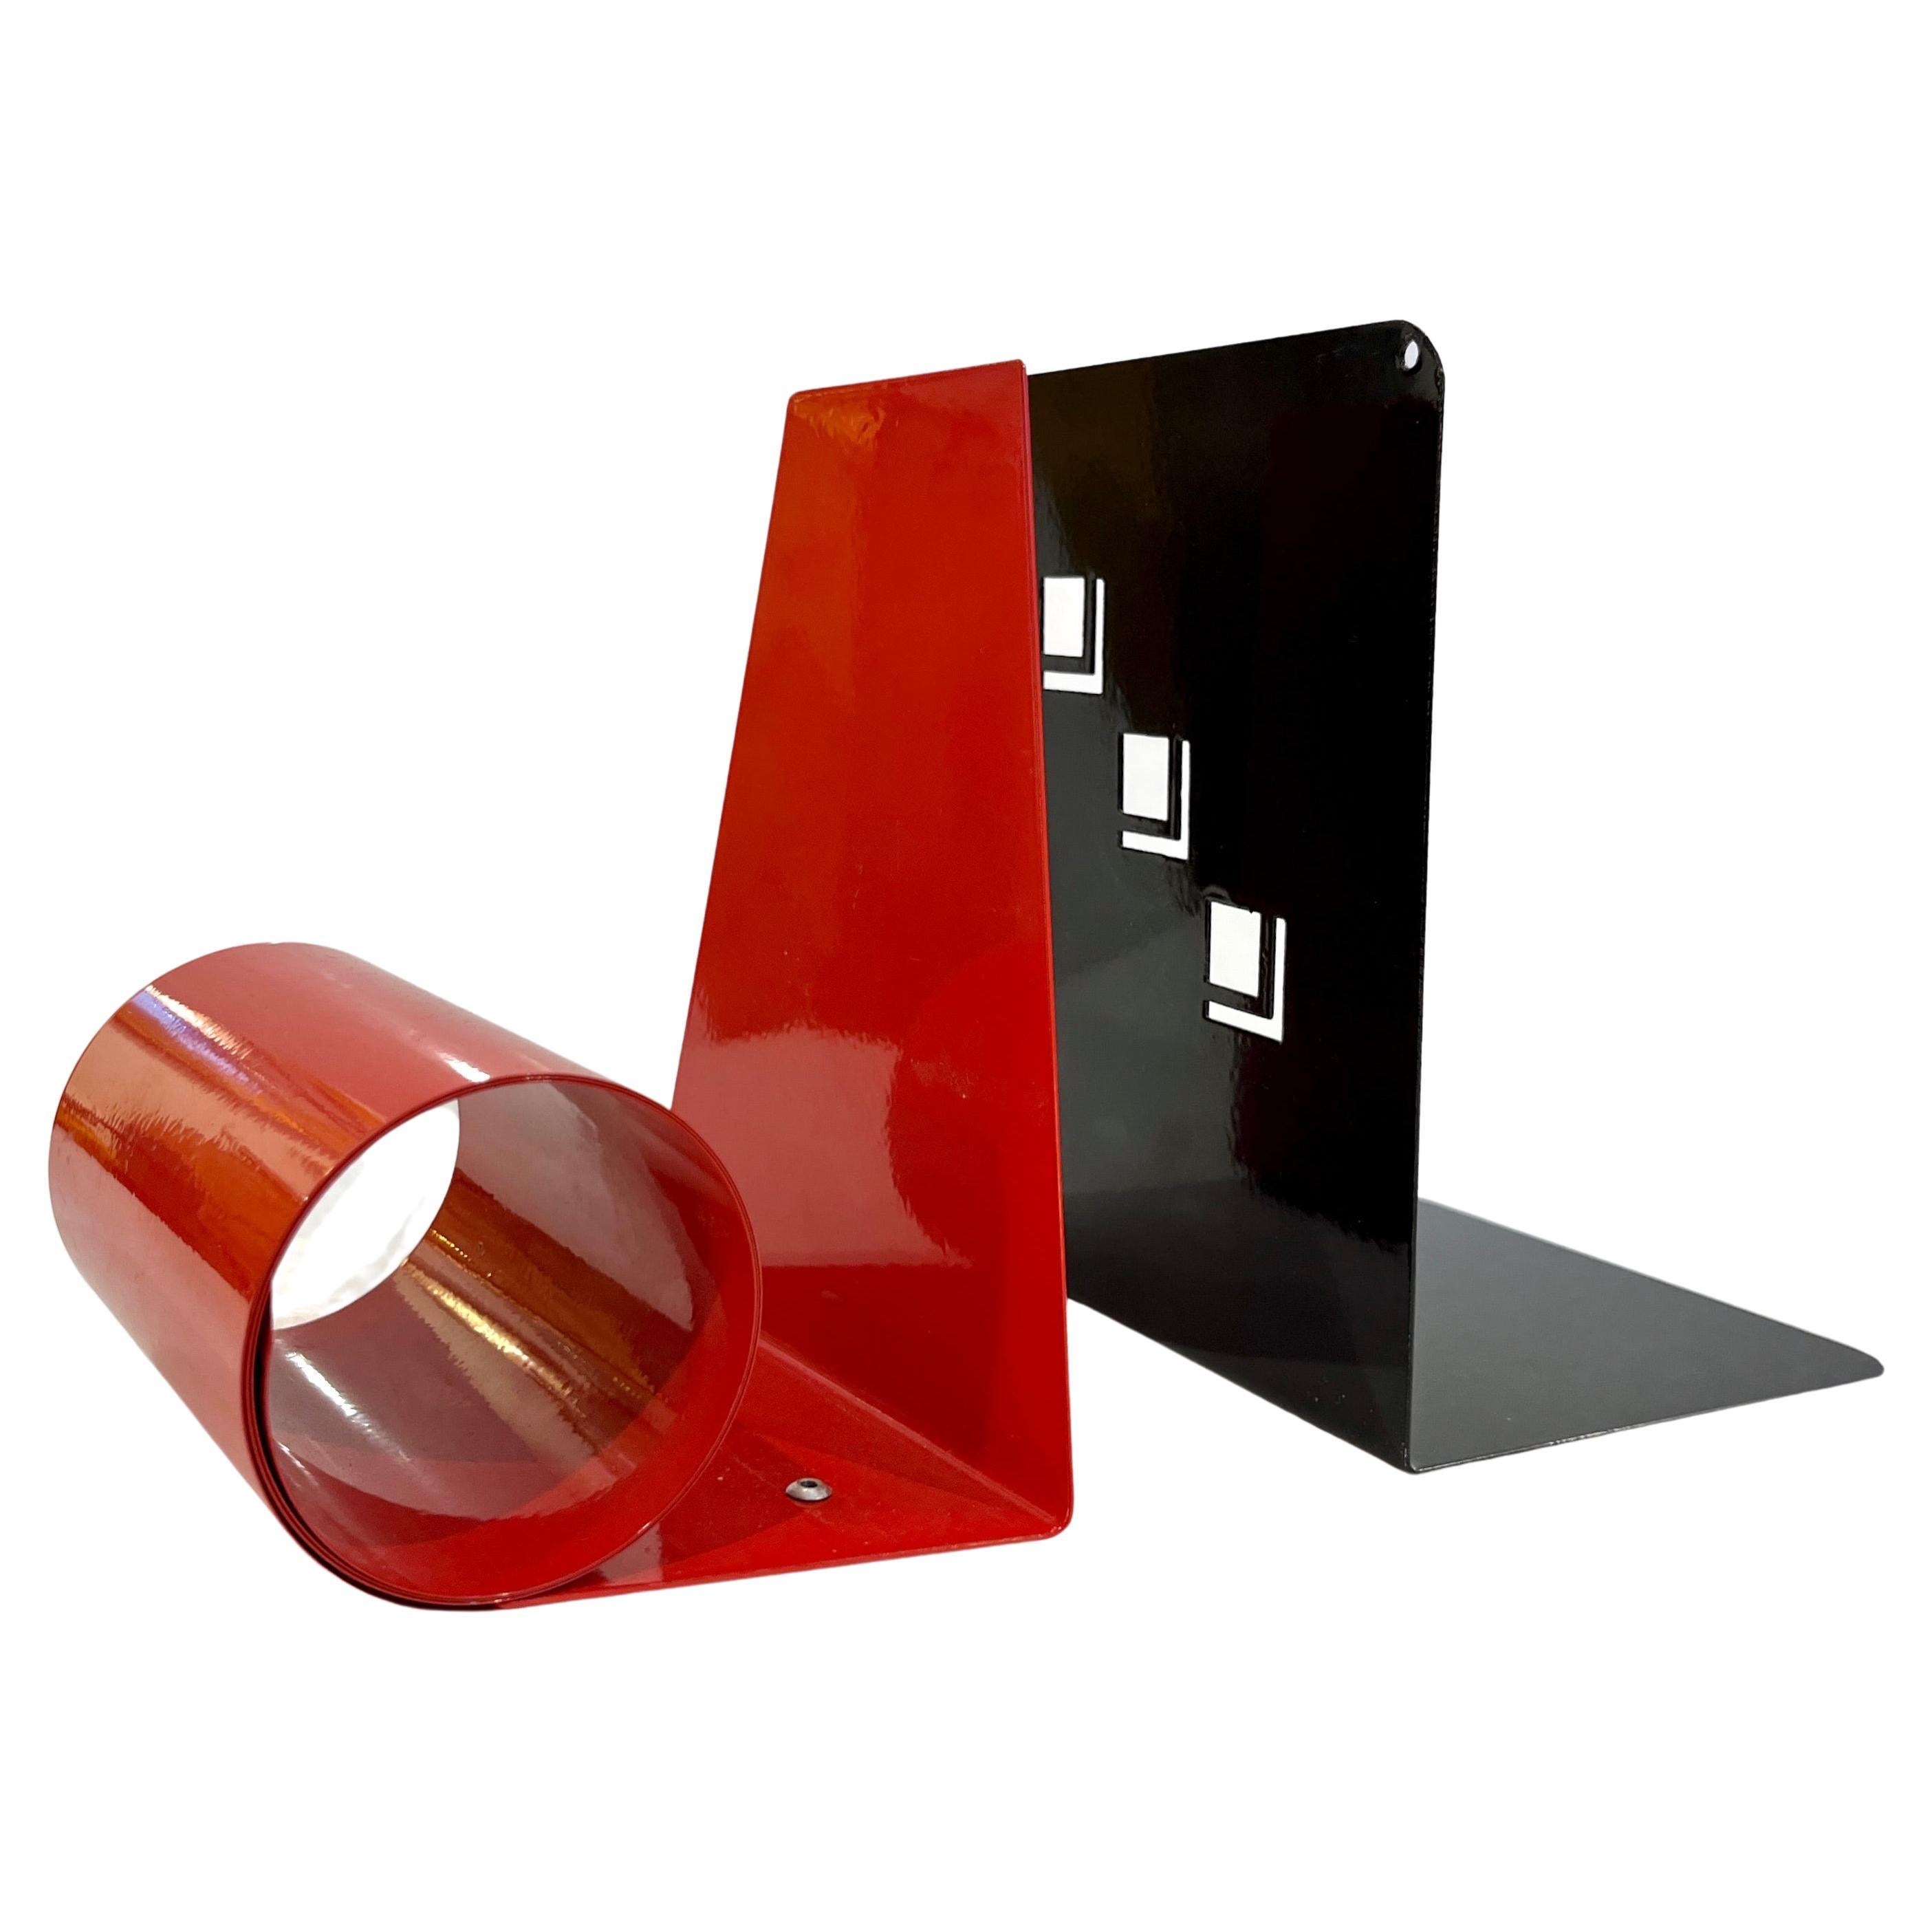 1970s Italian Vintage Red & Black Lacquered Metal Post-Modern Geometric Bookends For Sale